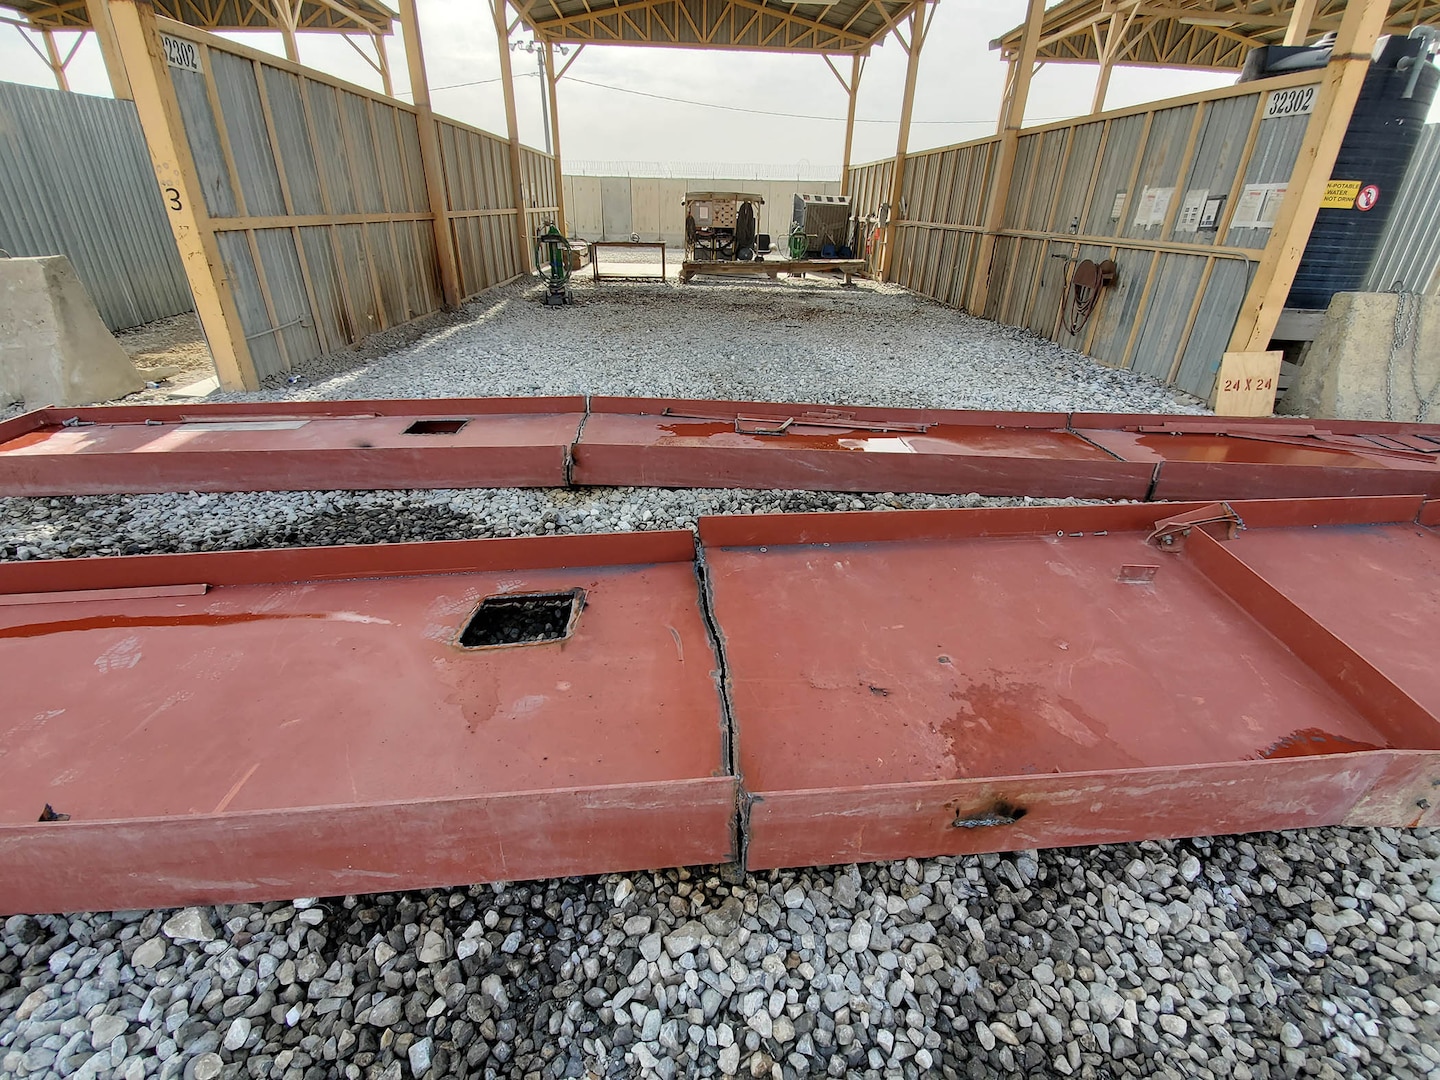 Huge pieces of building materials are reduced to more manageable sizes at a cutting bay at the DLA Disposition Services site at Bagram, Afghanistan.